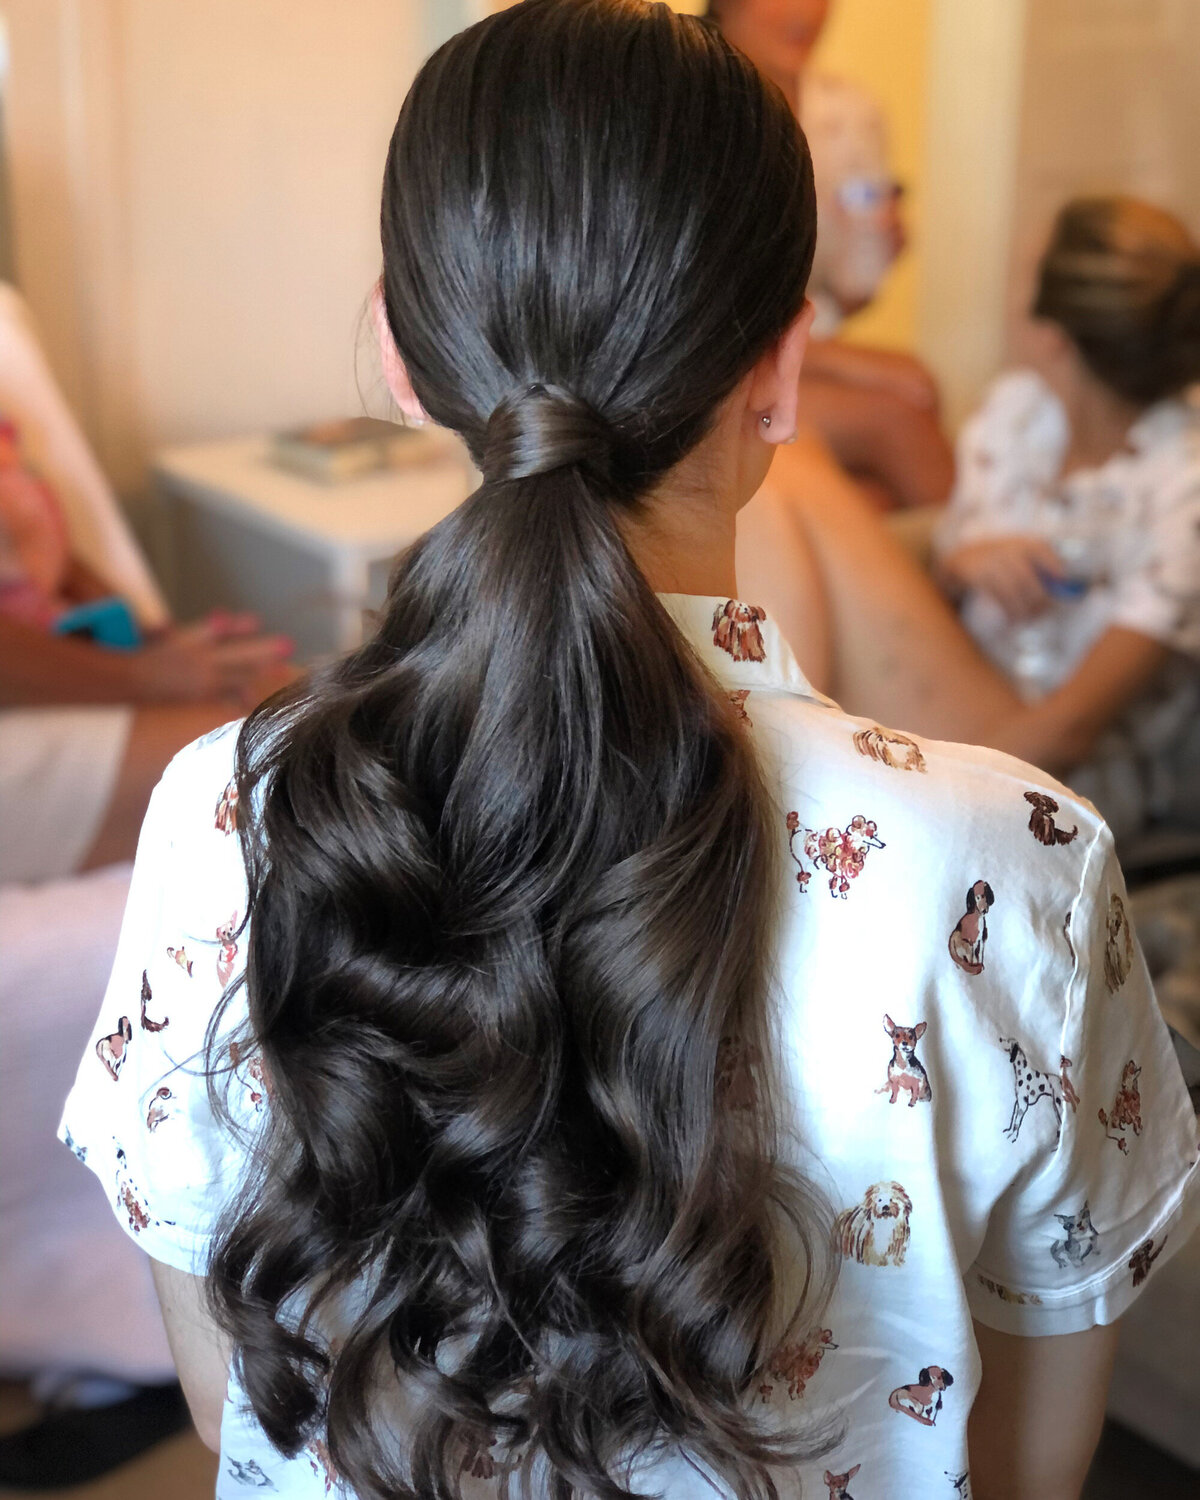 erica-renee-beauty-hair-and-makeup-duo-traveling-ponytail-brunette-wavy-party-pony-bridesmaid-hairstyle